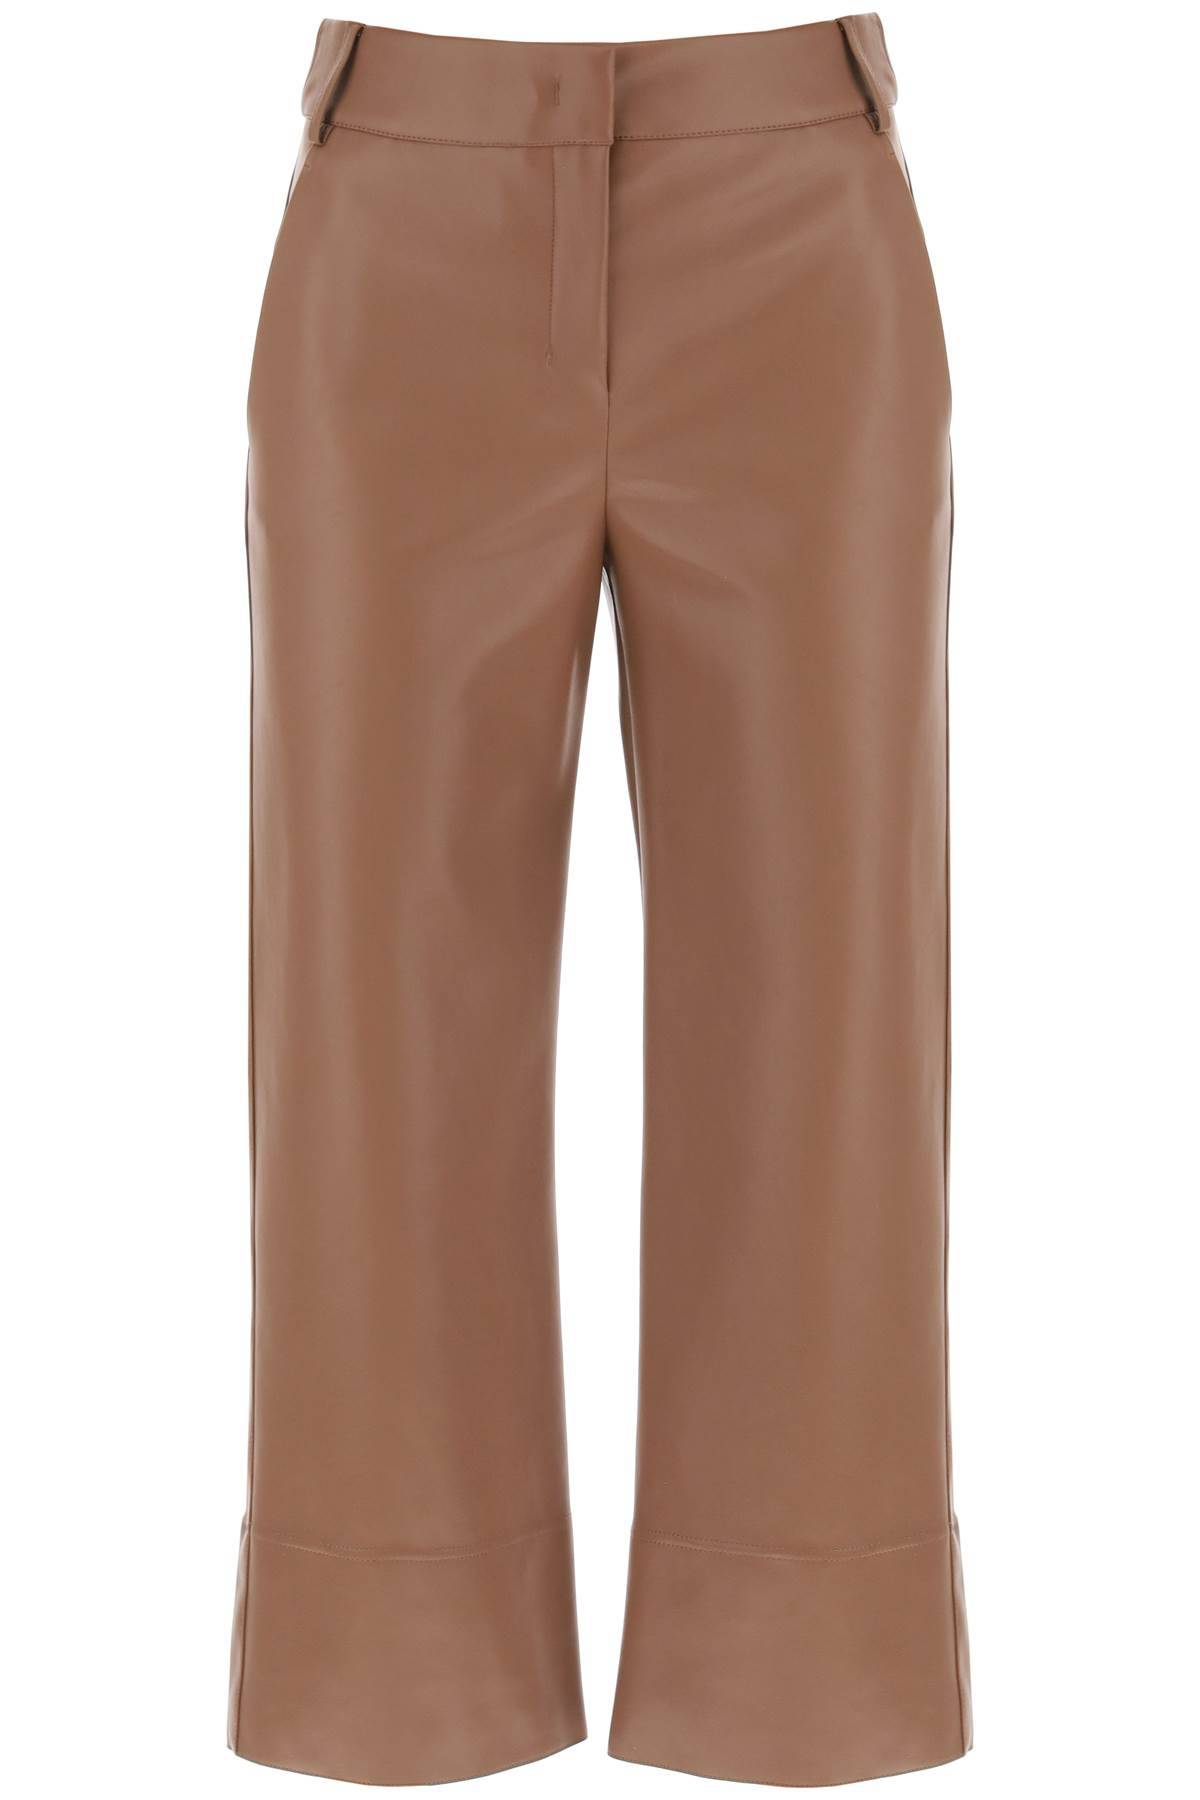 's Max Mara Soprano Faux-leather Pants In Brown